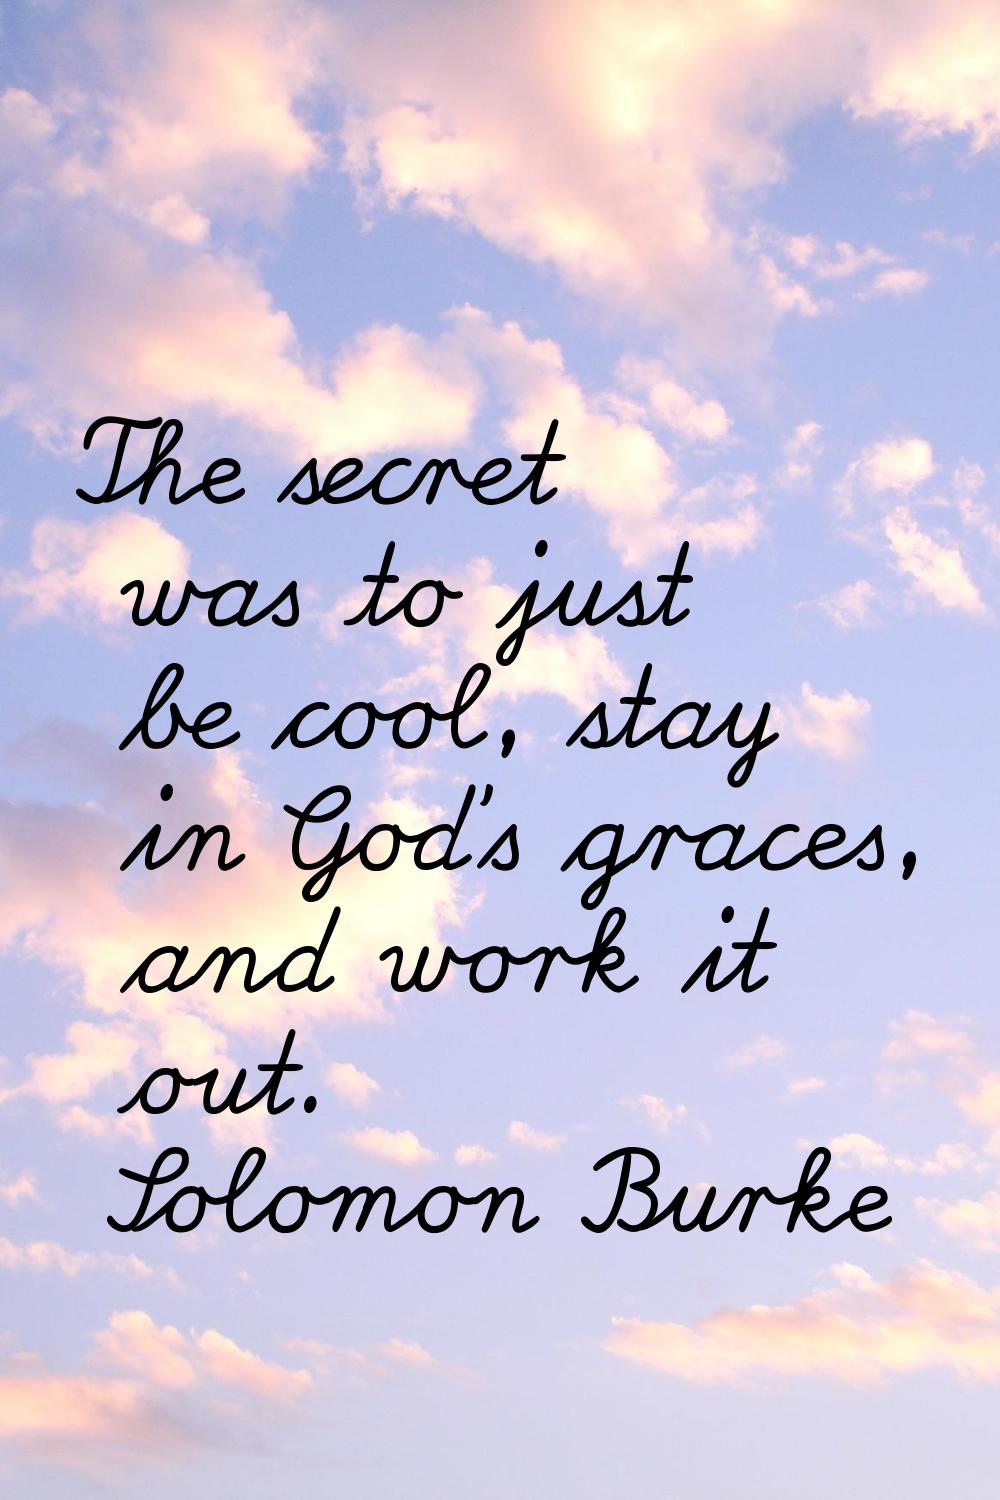 The secret was to just be cool, stay in God's graces, and work it out.